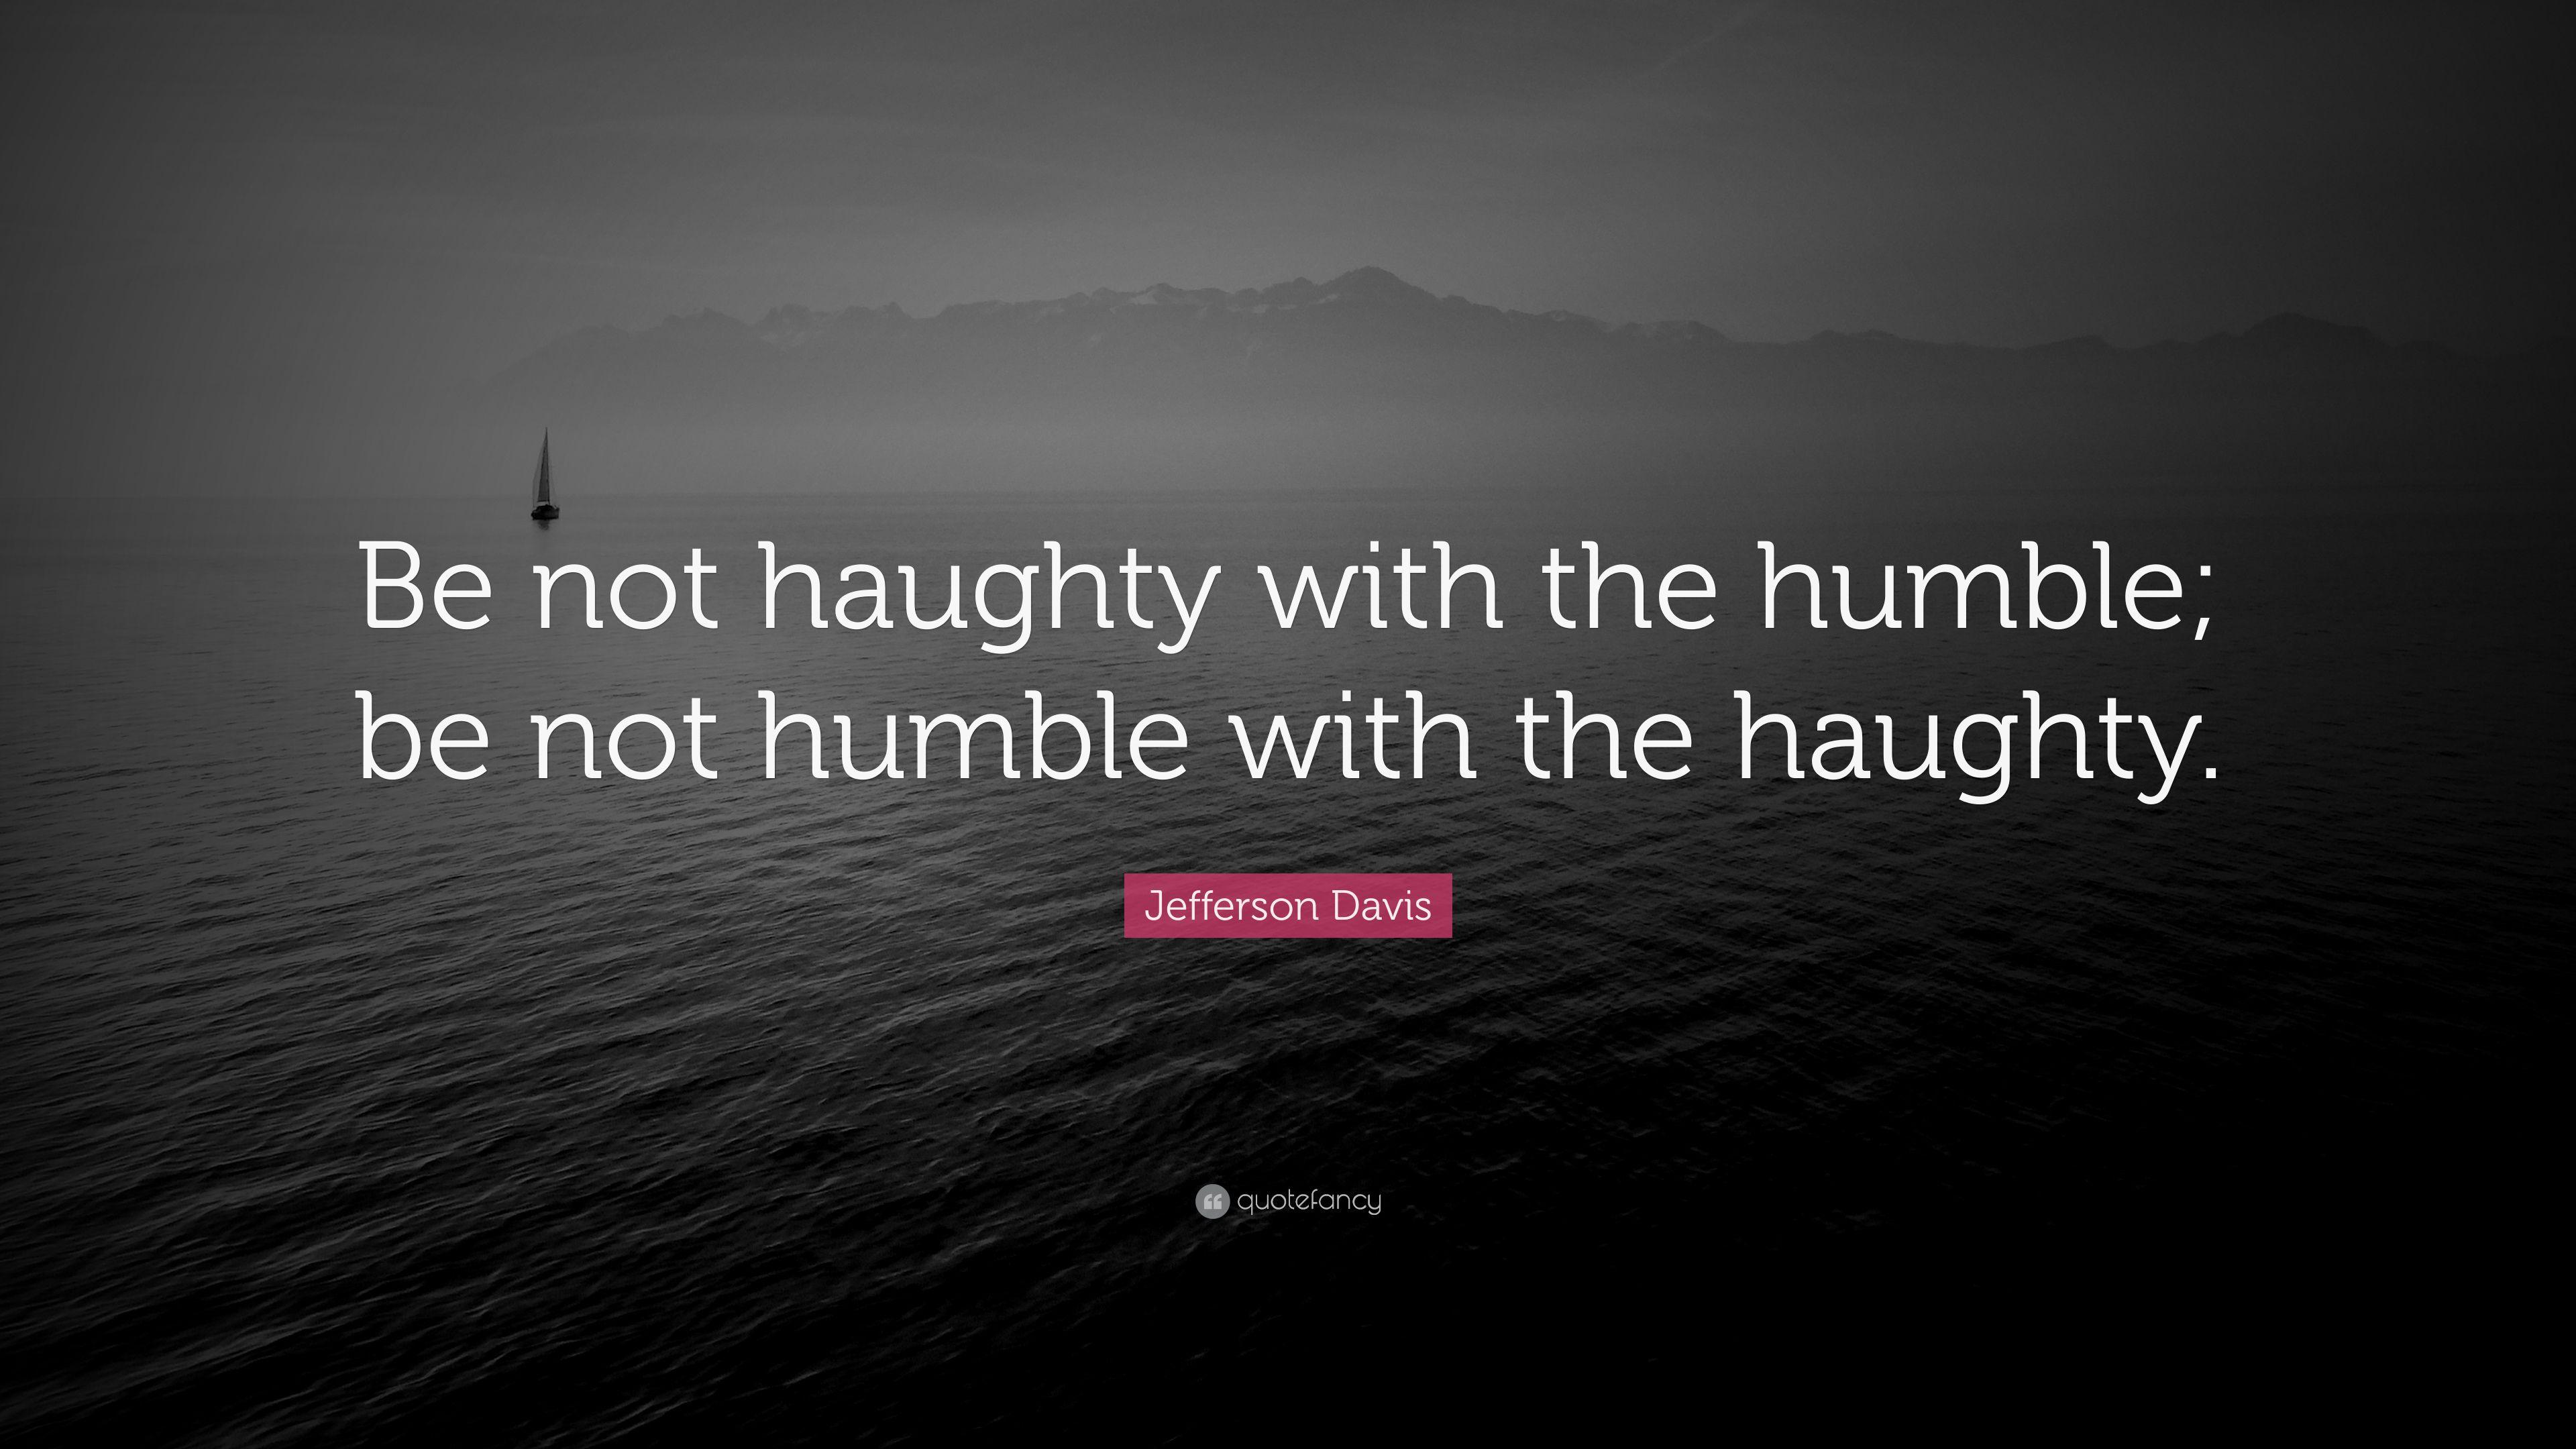 Jefferson Davis Quote: “Be not haughty with the humble; be not